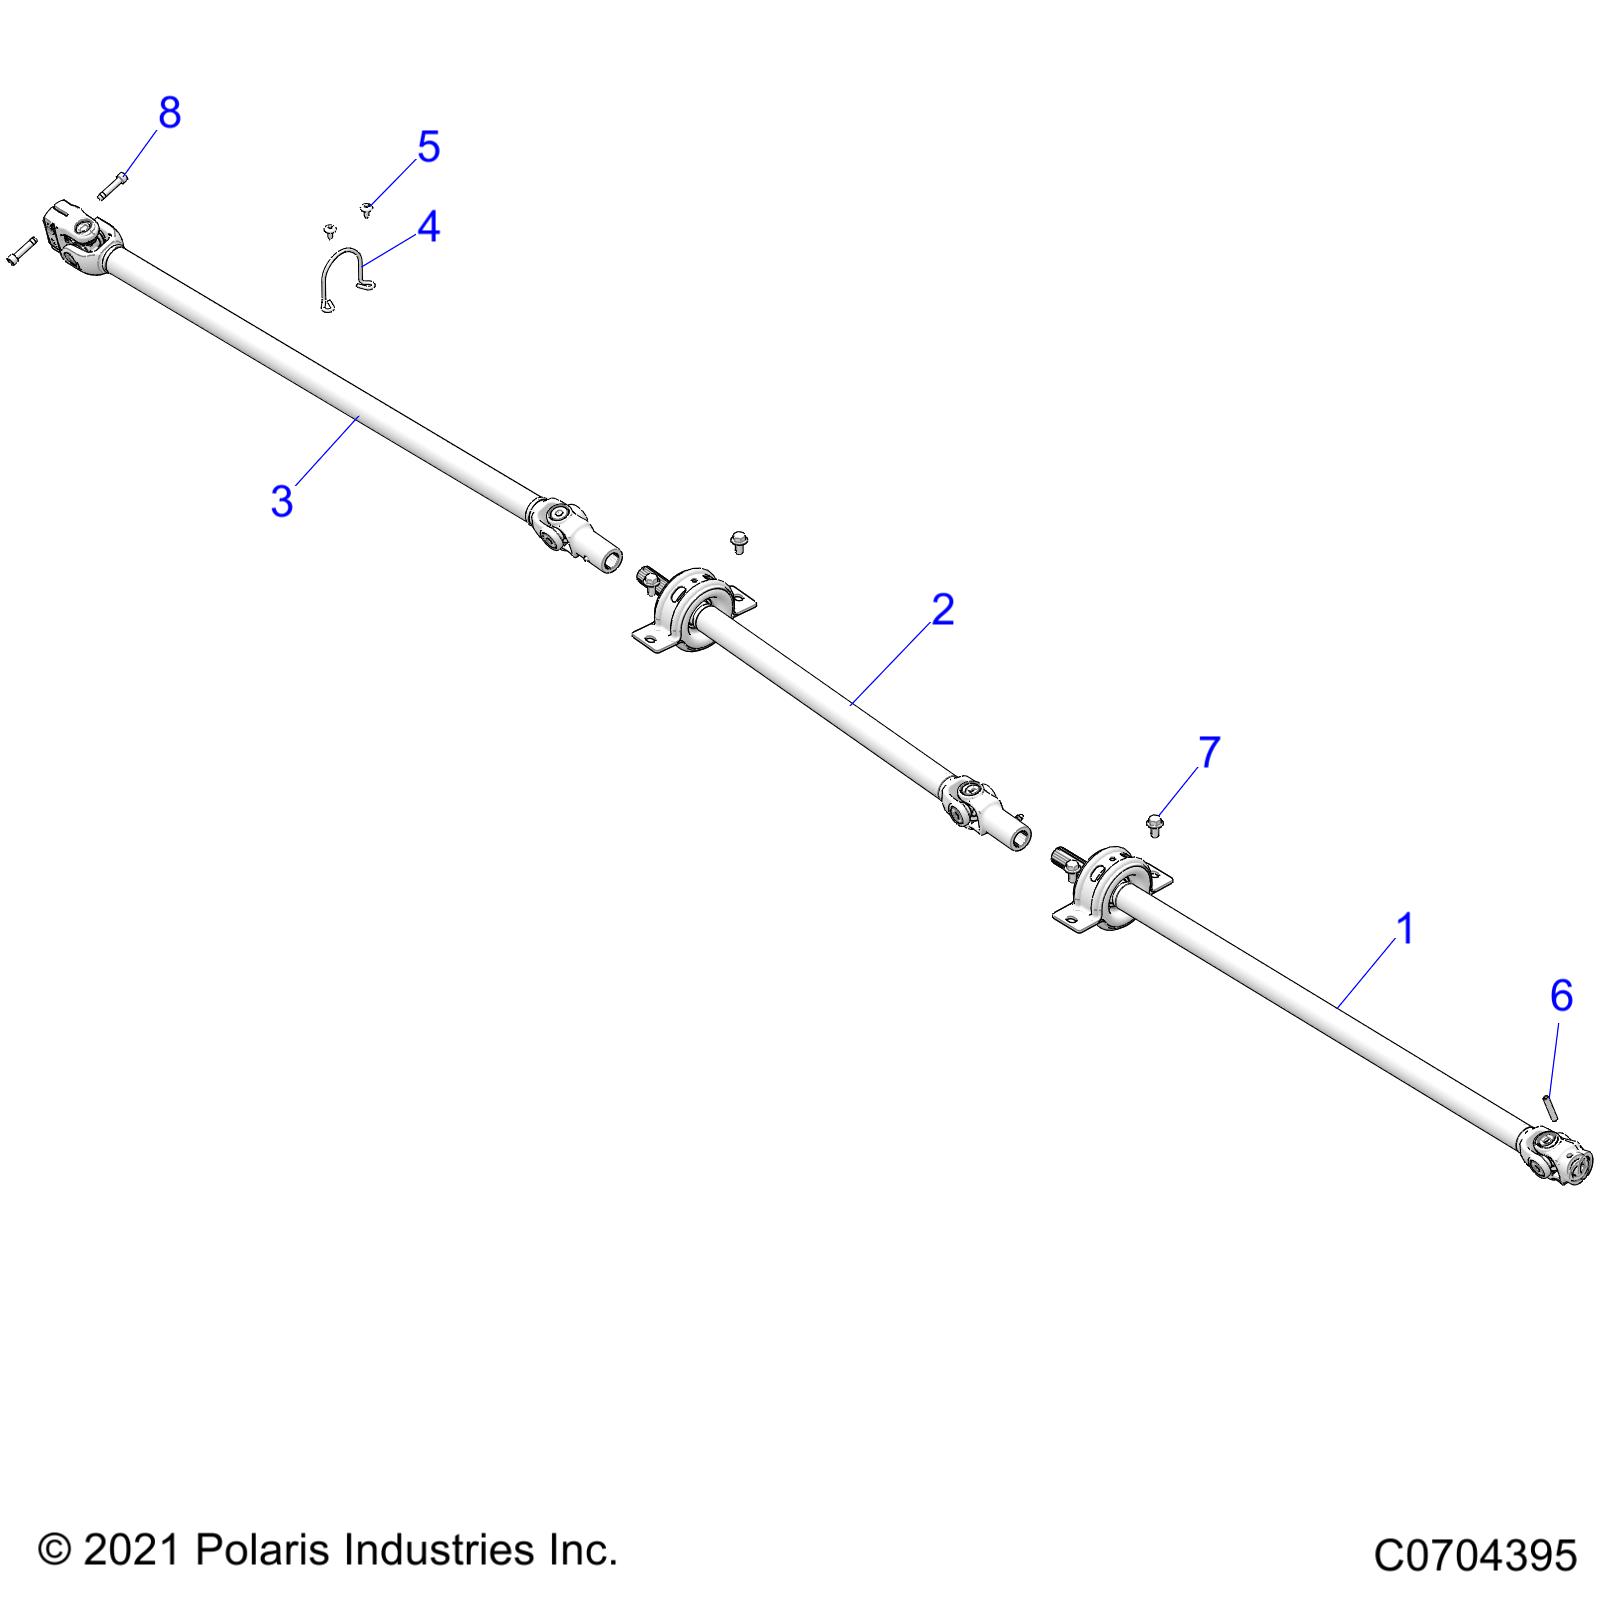 Part Number : 1334062 PROPSHAFT ASSEMBLY WITH BEARIN